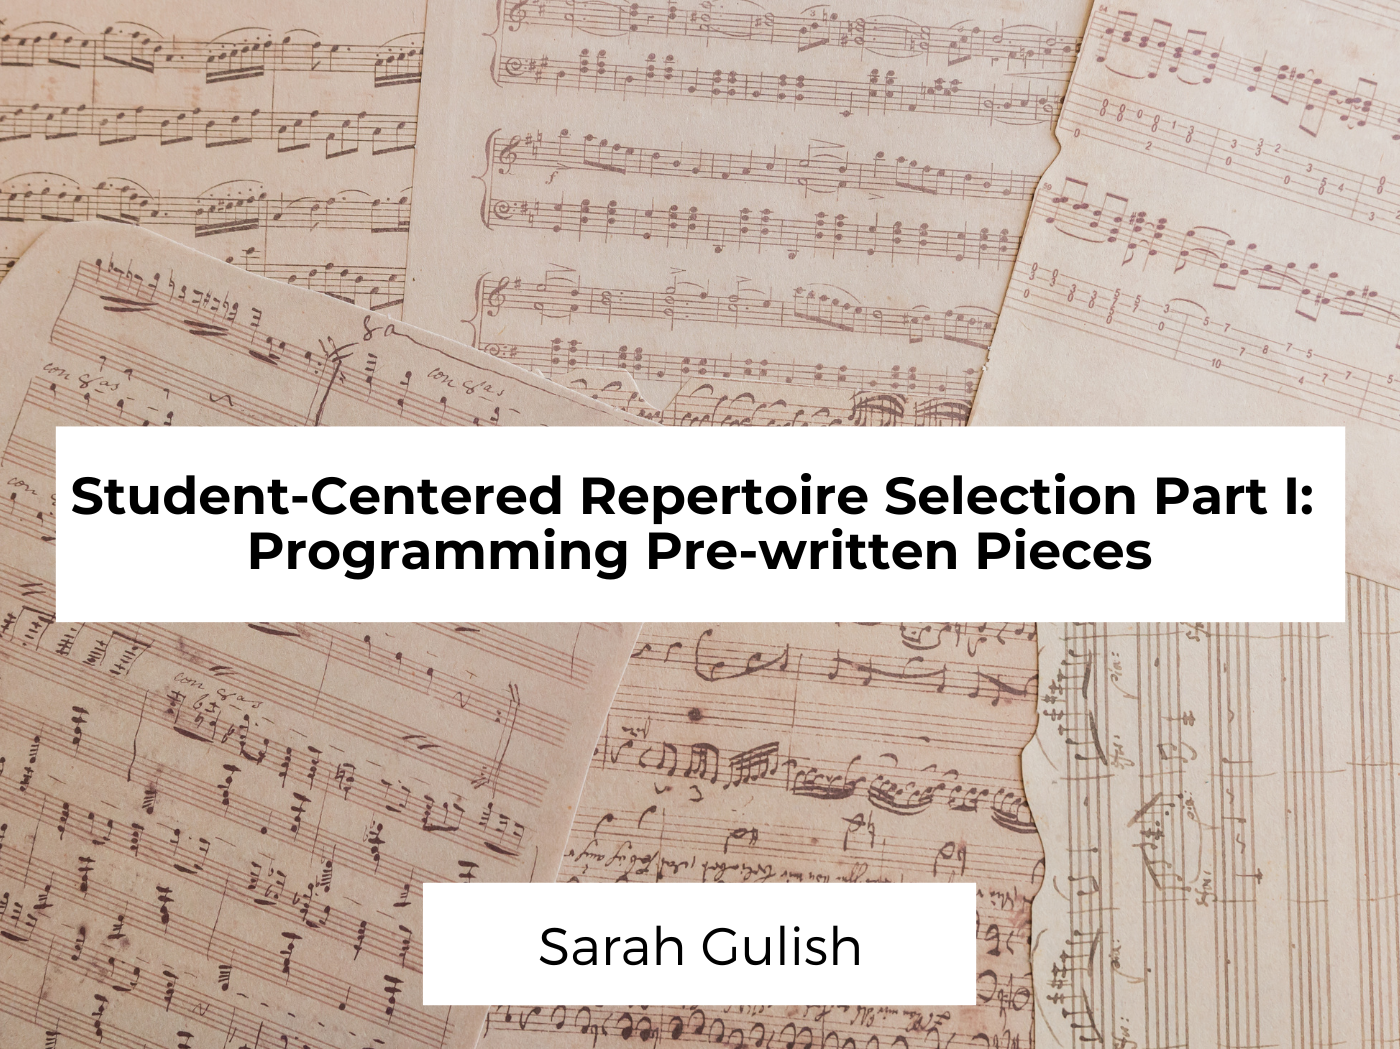 Student-centered repertoire selection